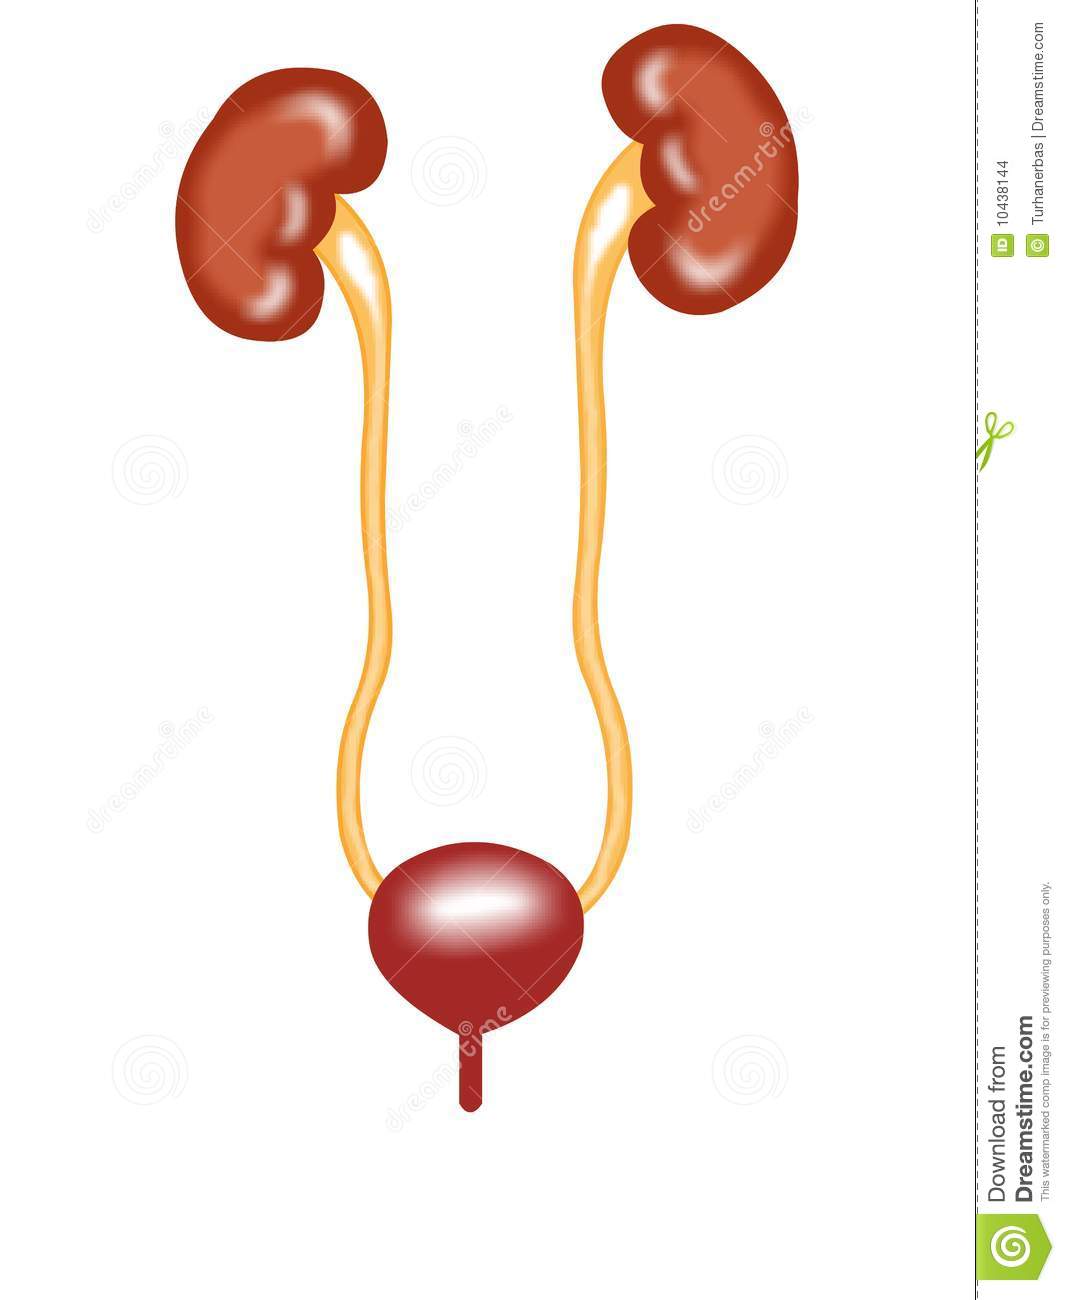 Stock Images  Front View Of Urinary Tract